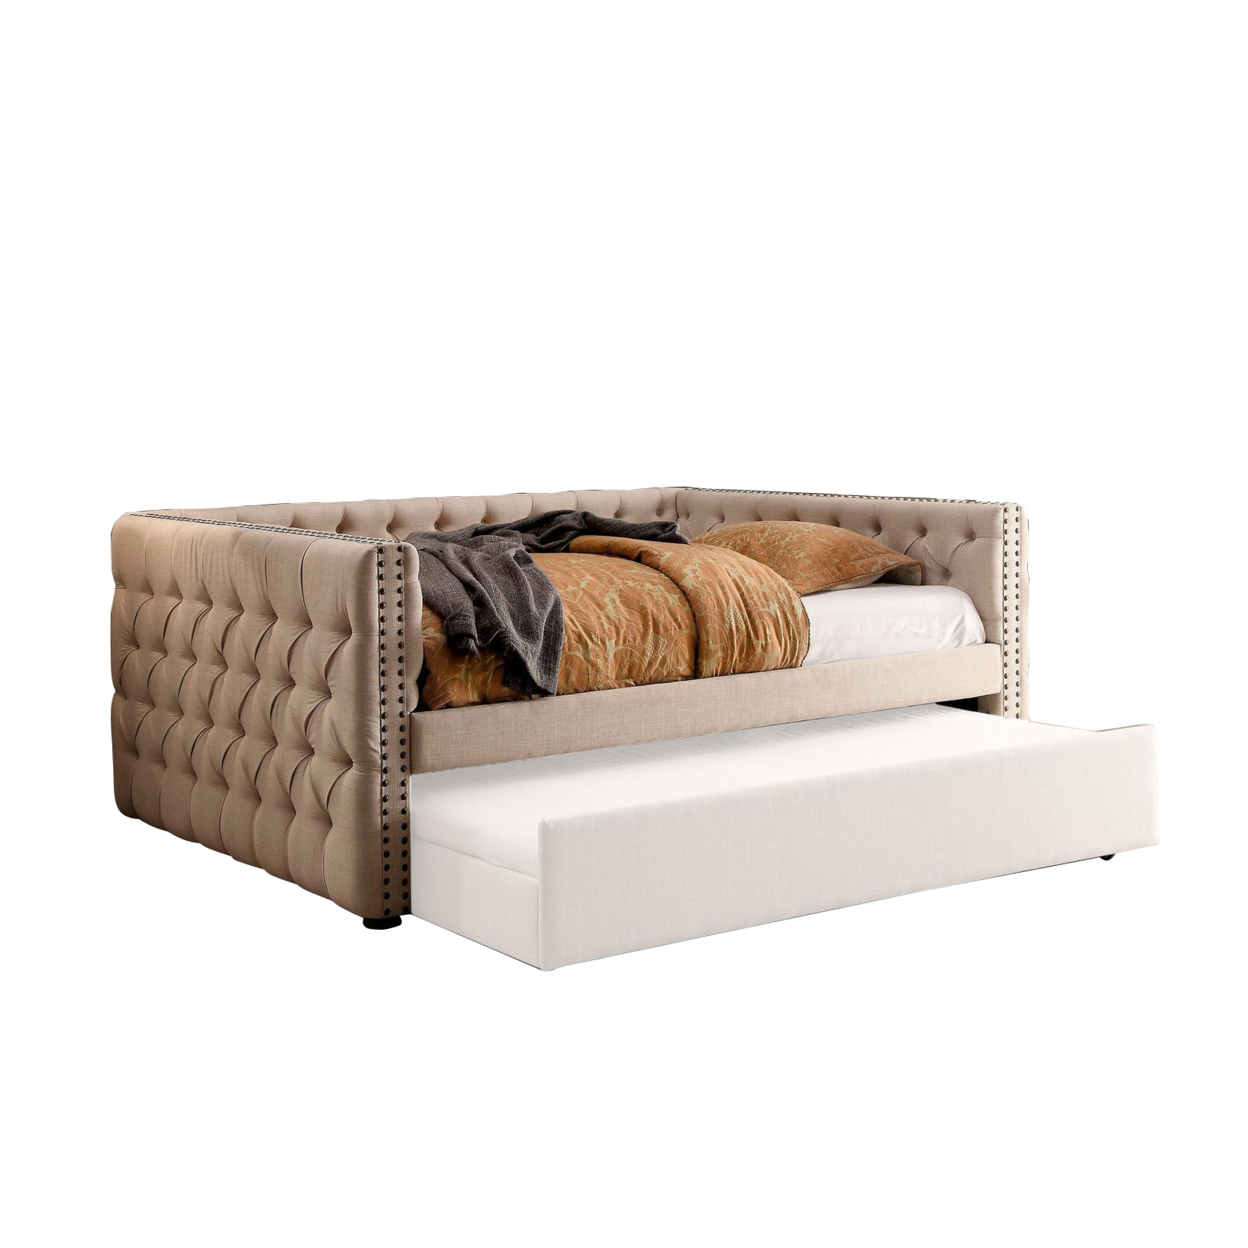 Fabric Upholstered Wooden Daybed With Diamond Button Tuftings, Beige- Saltoro Sherpi